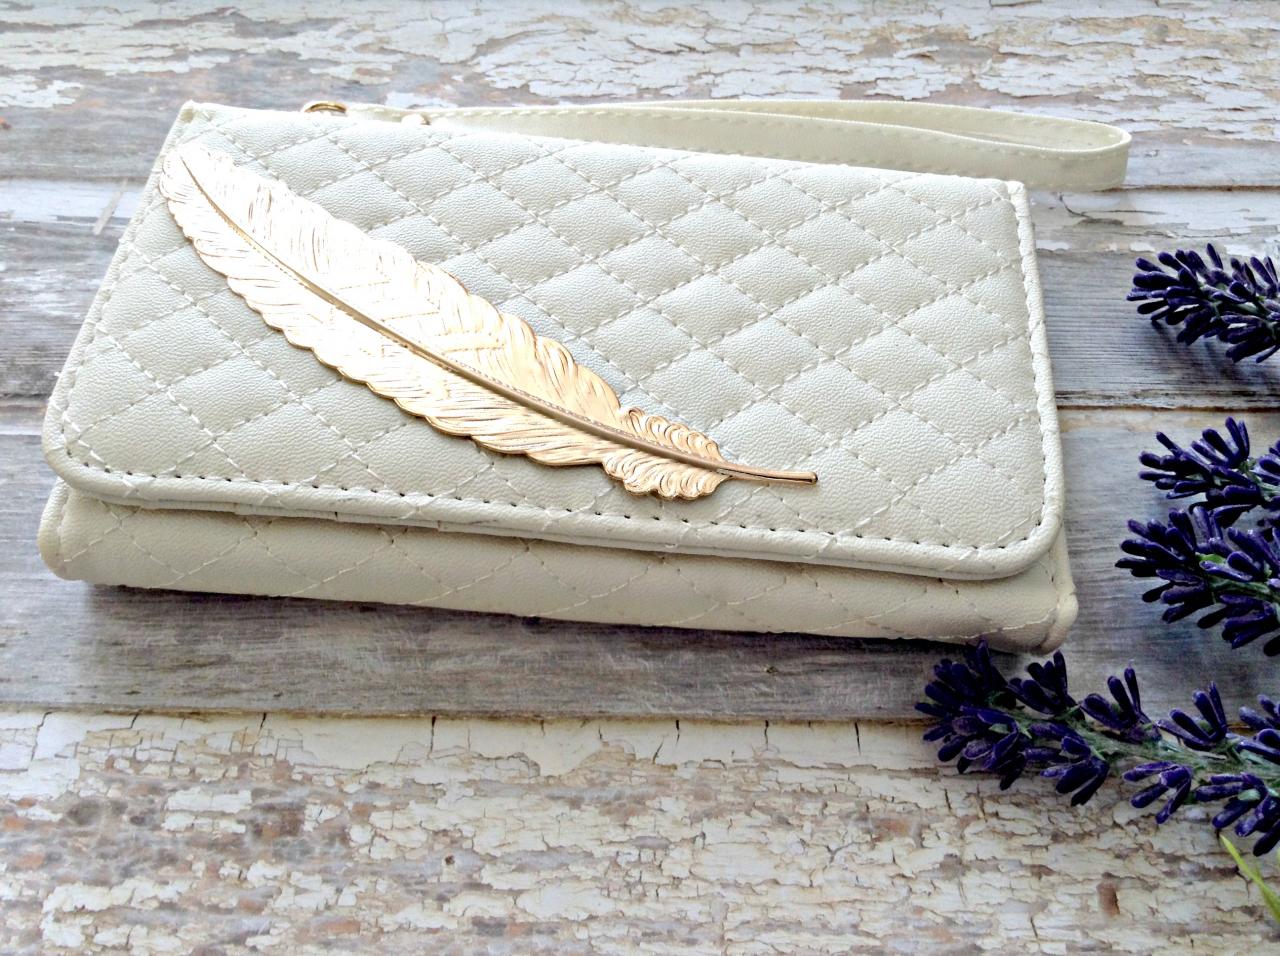 Feather Iphone 6 Wallet Case, Iphone 6 Plus Wallet Case, Iphone 5 5s 5c Wallet Case, Samsung Galaxy S5 S4 S3 Wallet Case, Samsung Galaxy Note 4